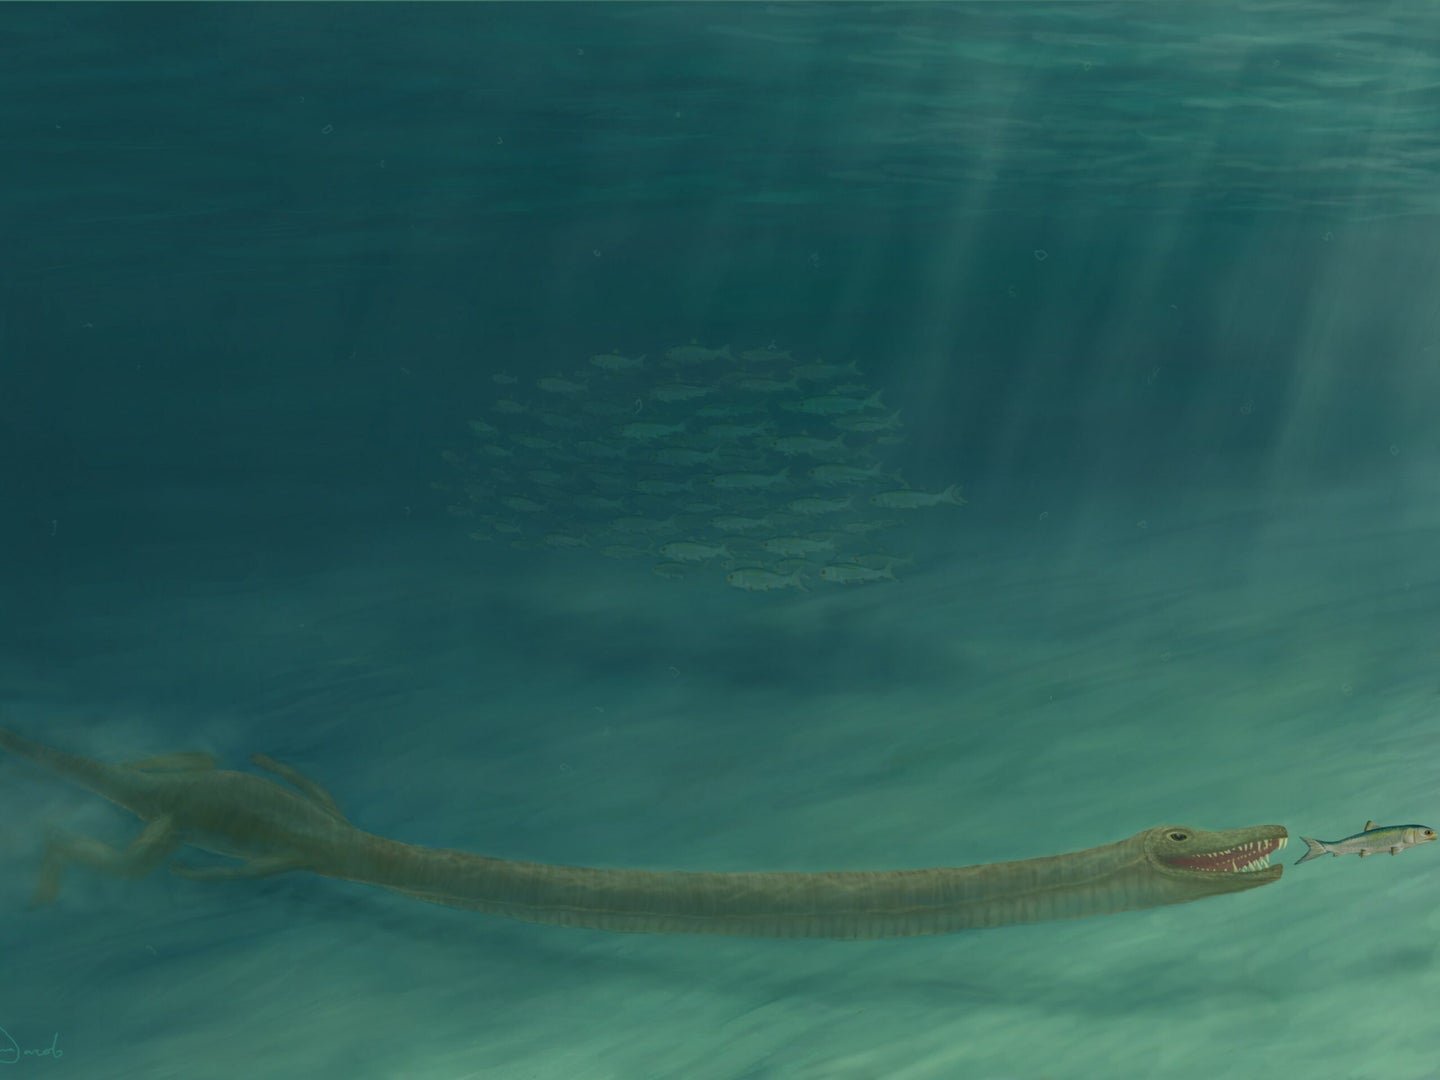 This ancient reptile had a super long neck to sneak up on unsuspecting fish